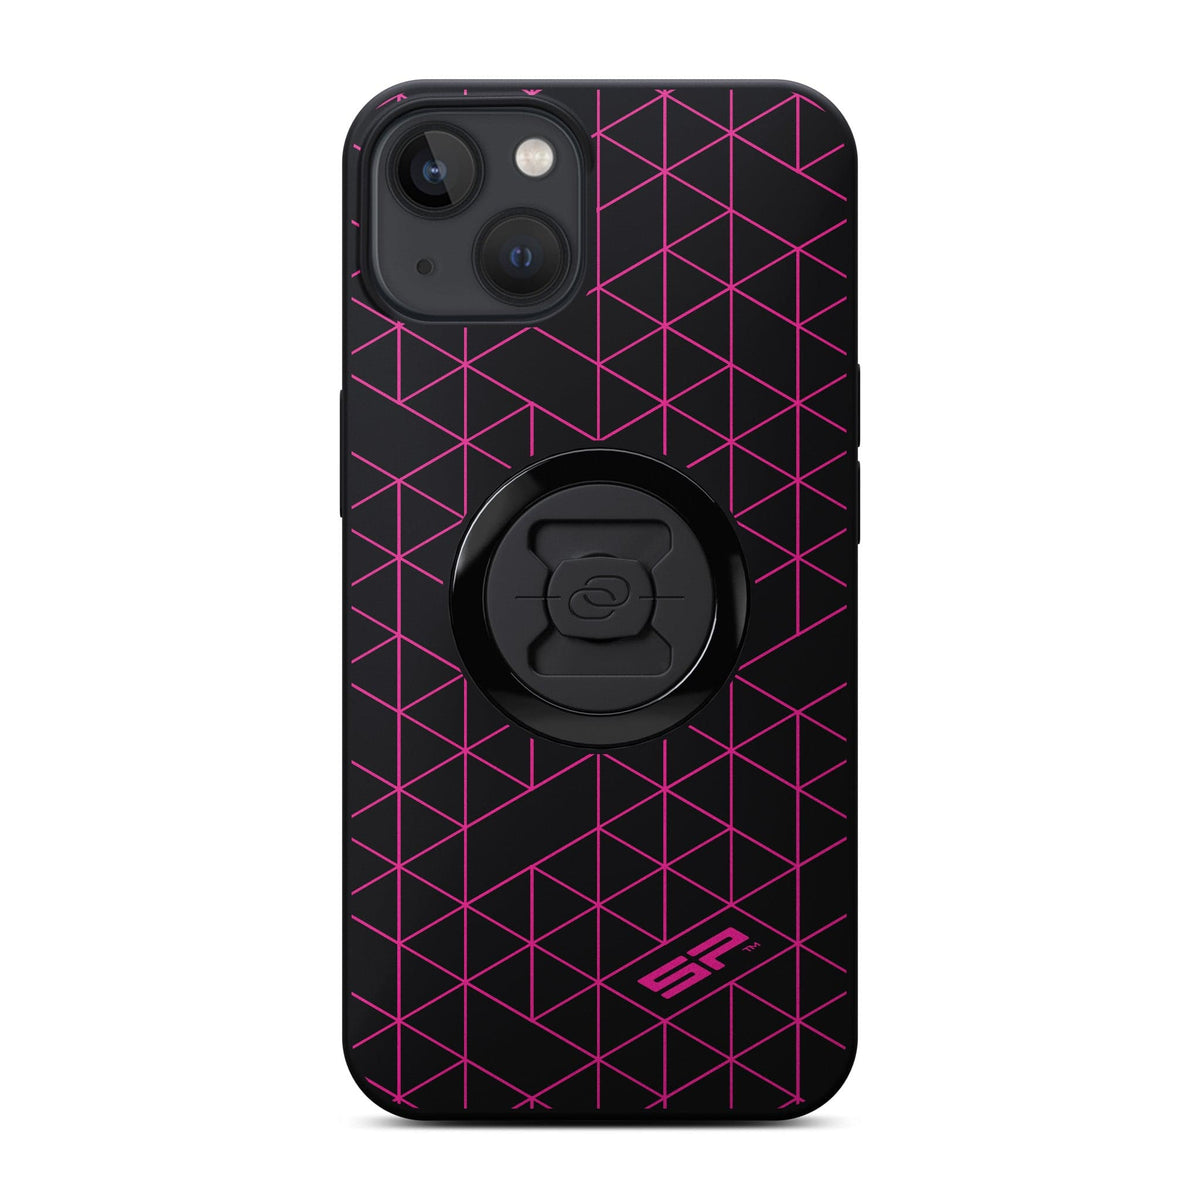 Edition Phone Case - Grid (Pink)